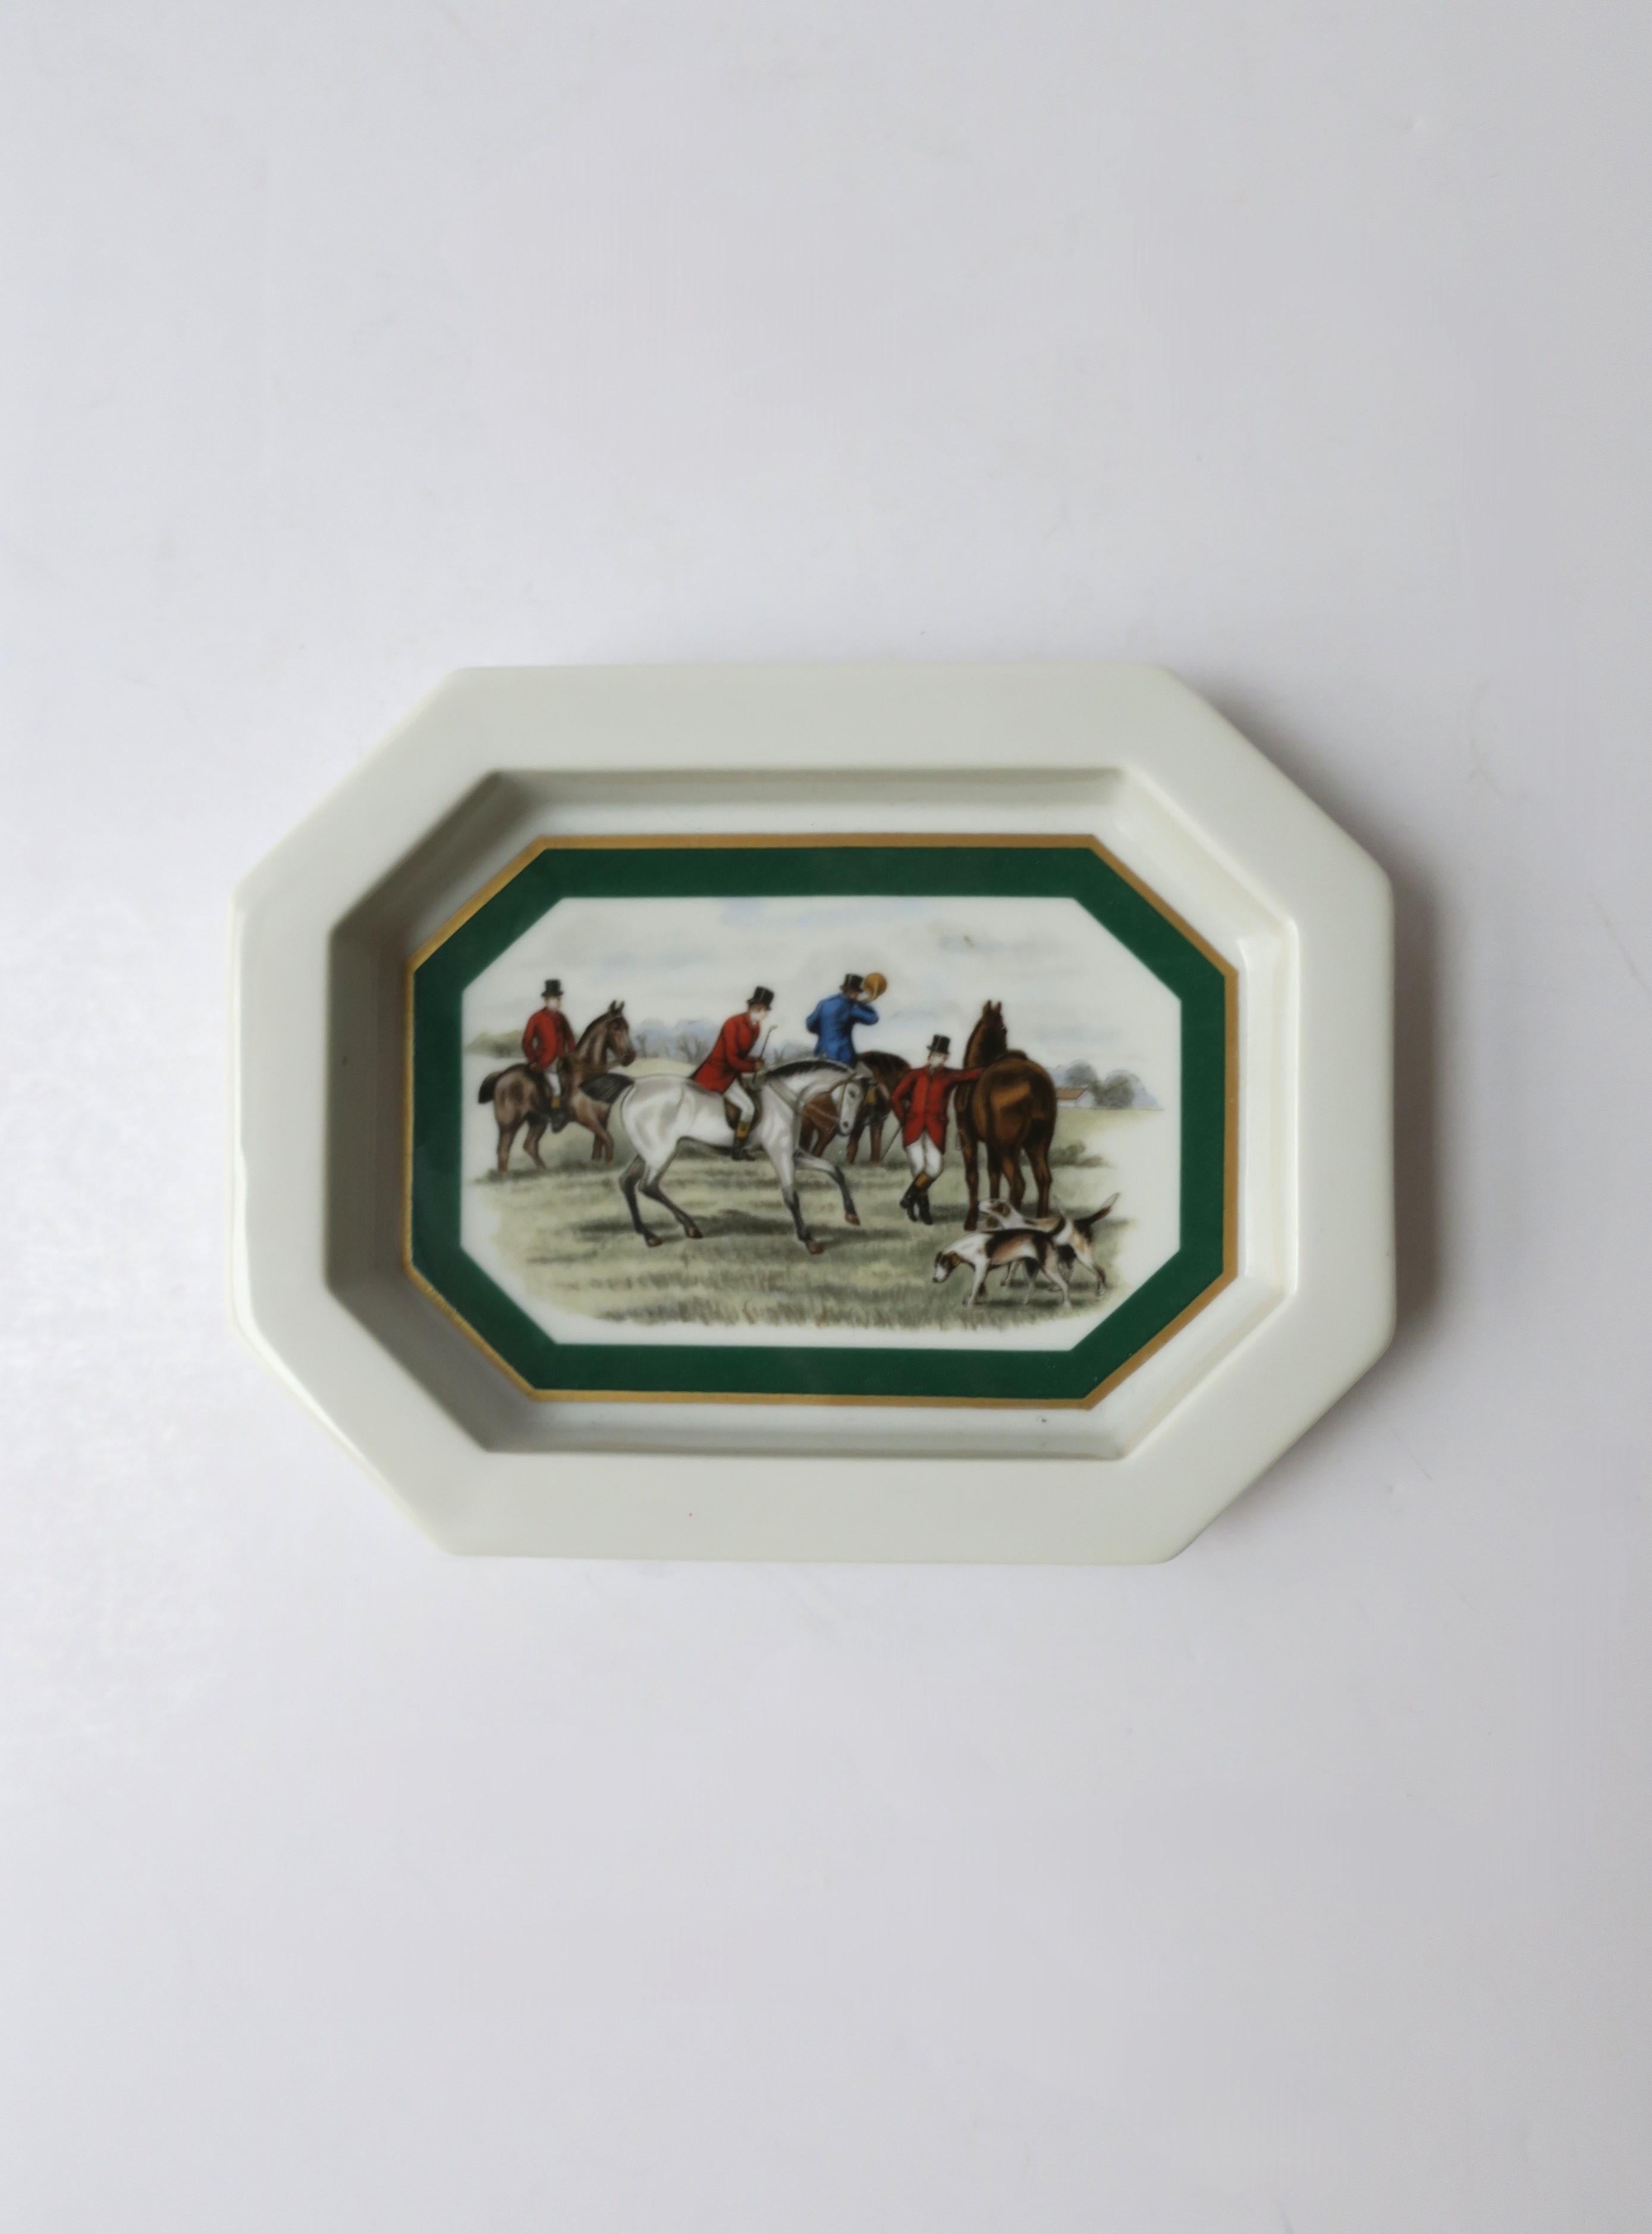 A porcelain jewelry dish with equestrian horse scene, circa mid-20th century, Europe. An octagonal jewelry dish/small vide-poche with gold and emerald-green detail framing scene of equestrian riders, horses, and hound dogs. In the style of Ralph